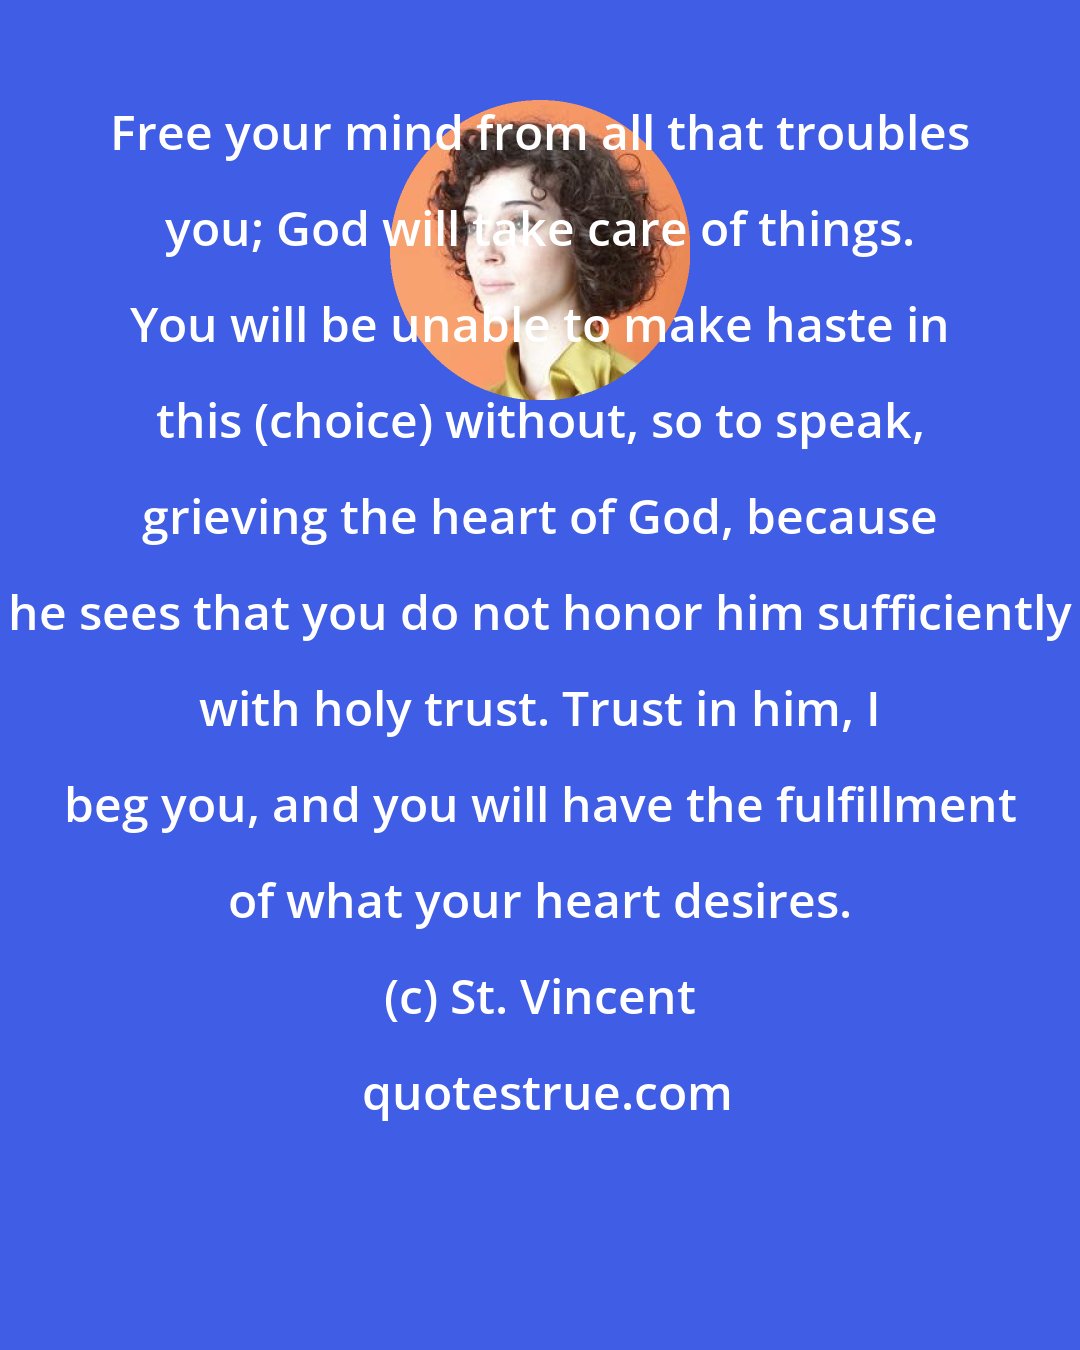 St. Vincent: Free your mind from all that troubles you; God will take care of things. You will be unable to make haste in this (choice) without, so to speak, grieving the heart of God, because he sees that you do not honor him sufficiently with holy trust. Trust in him, I beg you, and you will have the fulfillment of what your heart desires.